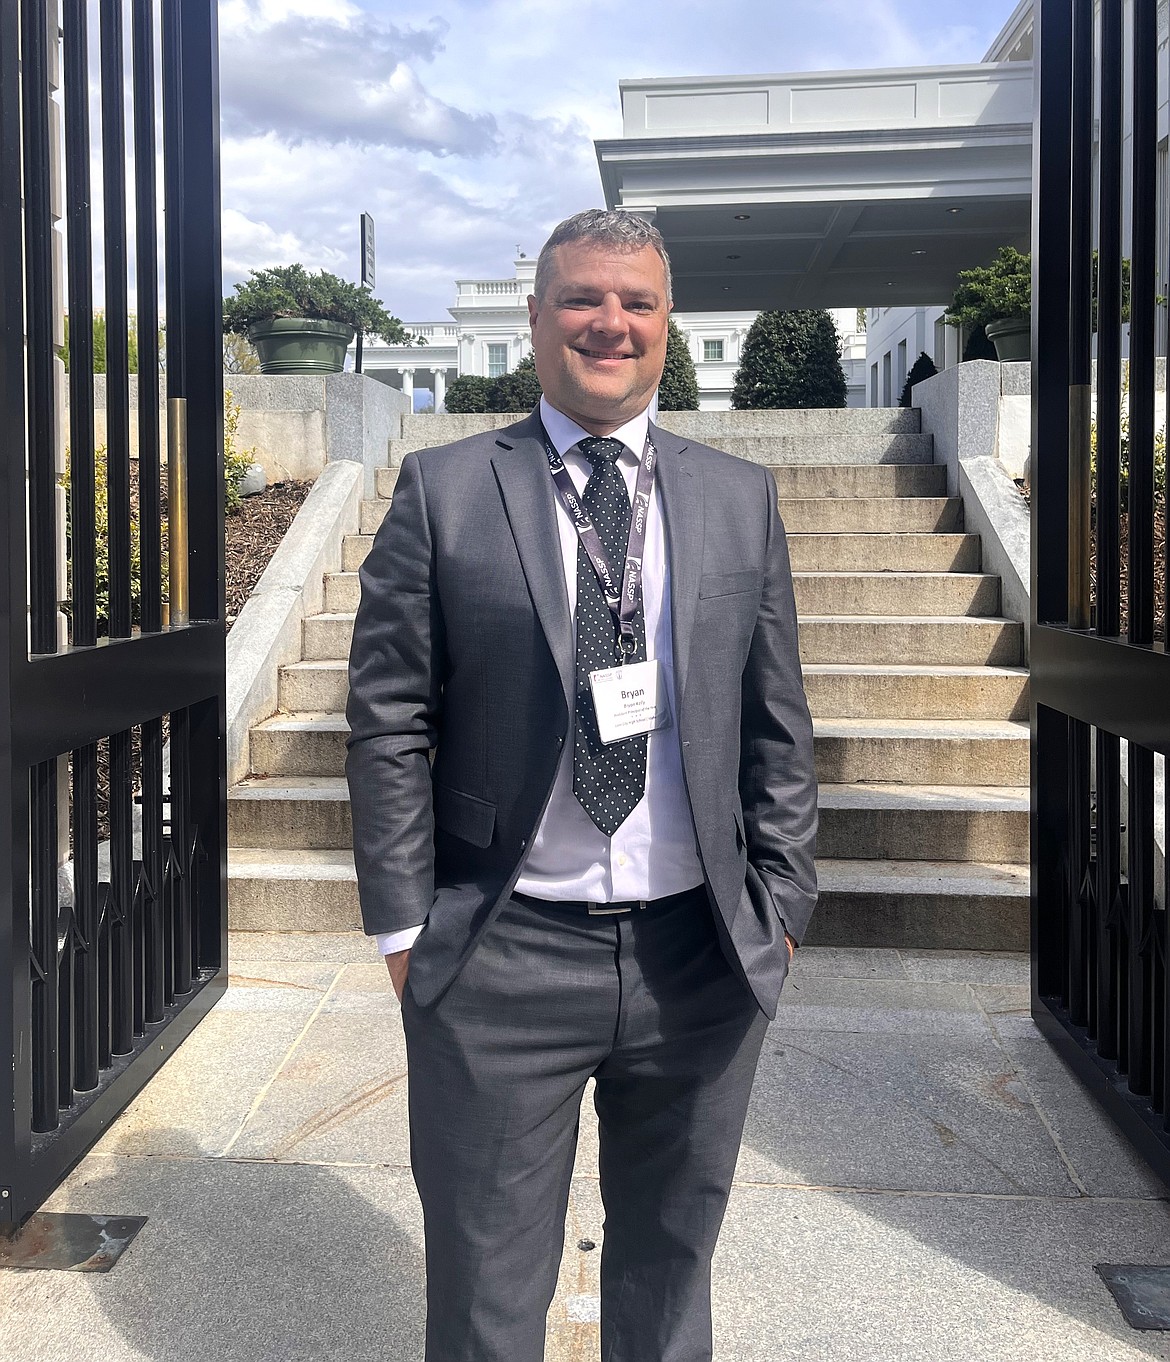 Lake City High School Assistant Principal Bryan Kelly is seen on the steps of the White House while in Washington, D.C. for the National Association of Secondary School Principals program, which was held April 3 through Saturday. Kelly was named the 2024 State of Idaho Assistant Principal of the Year by the Idaho Association of School Administrators' board of directors.